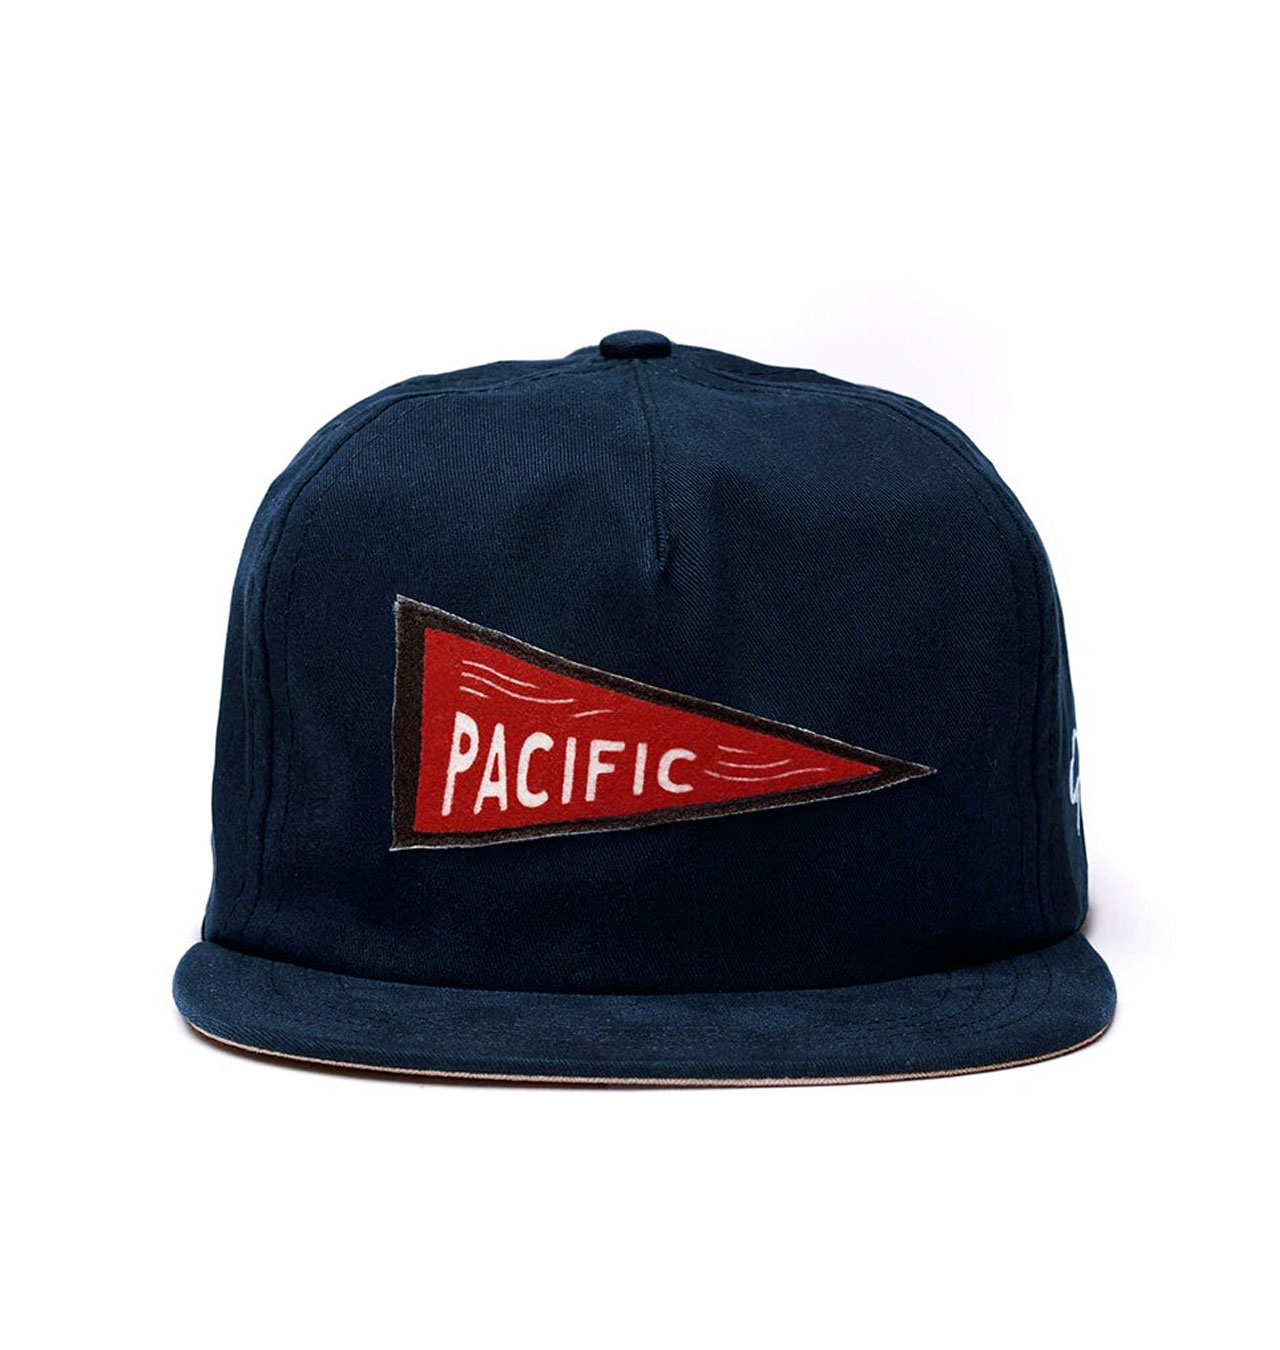 The-Ampal-Creative---Pacific-Pennant-Strapback-Cap---Navy-1